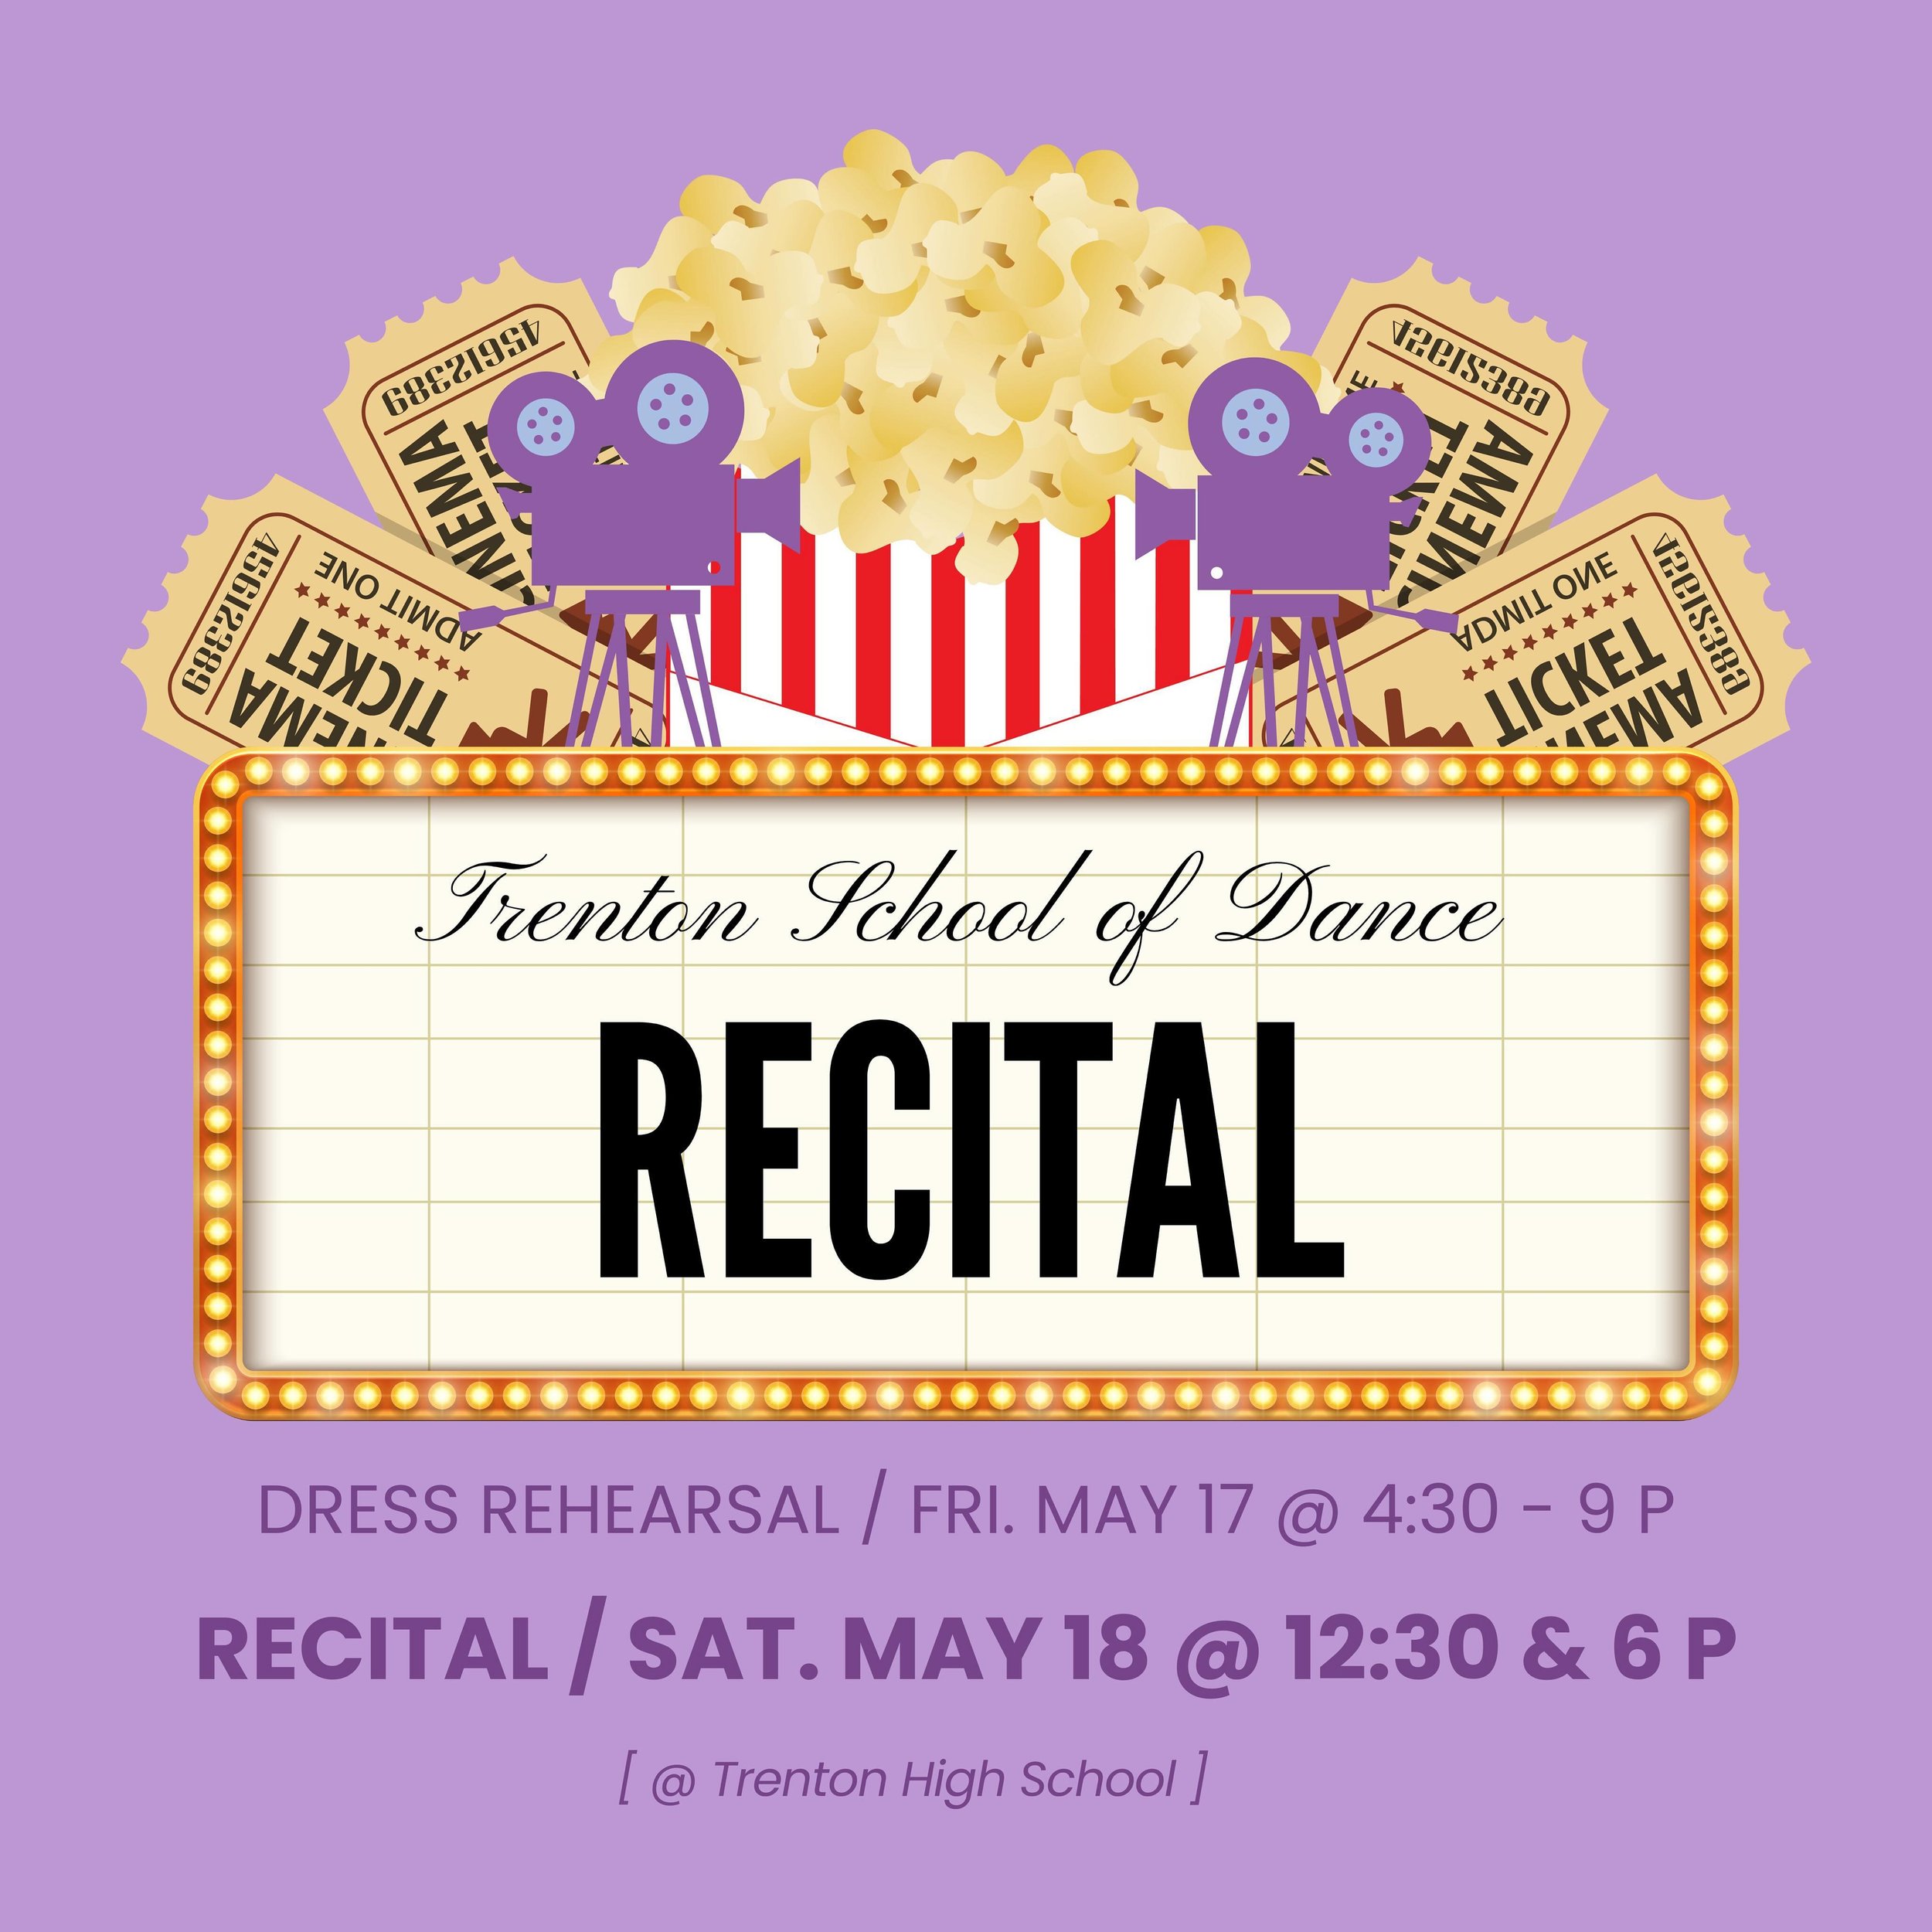 Looking forward to recital! 🤩 Check your email for your dress rehearsal/ recital assignments!